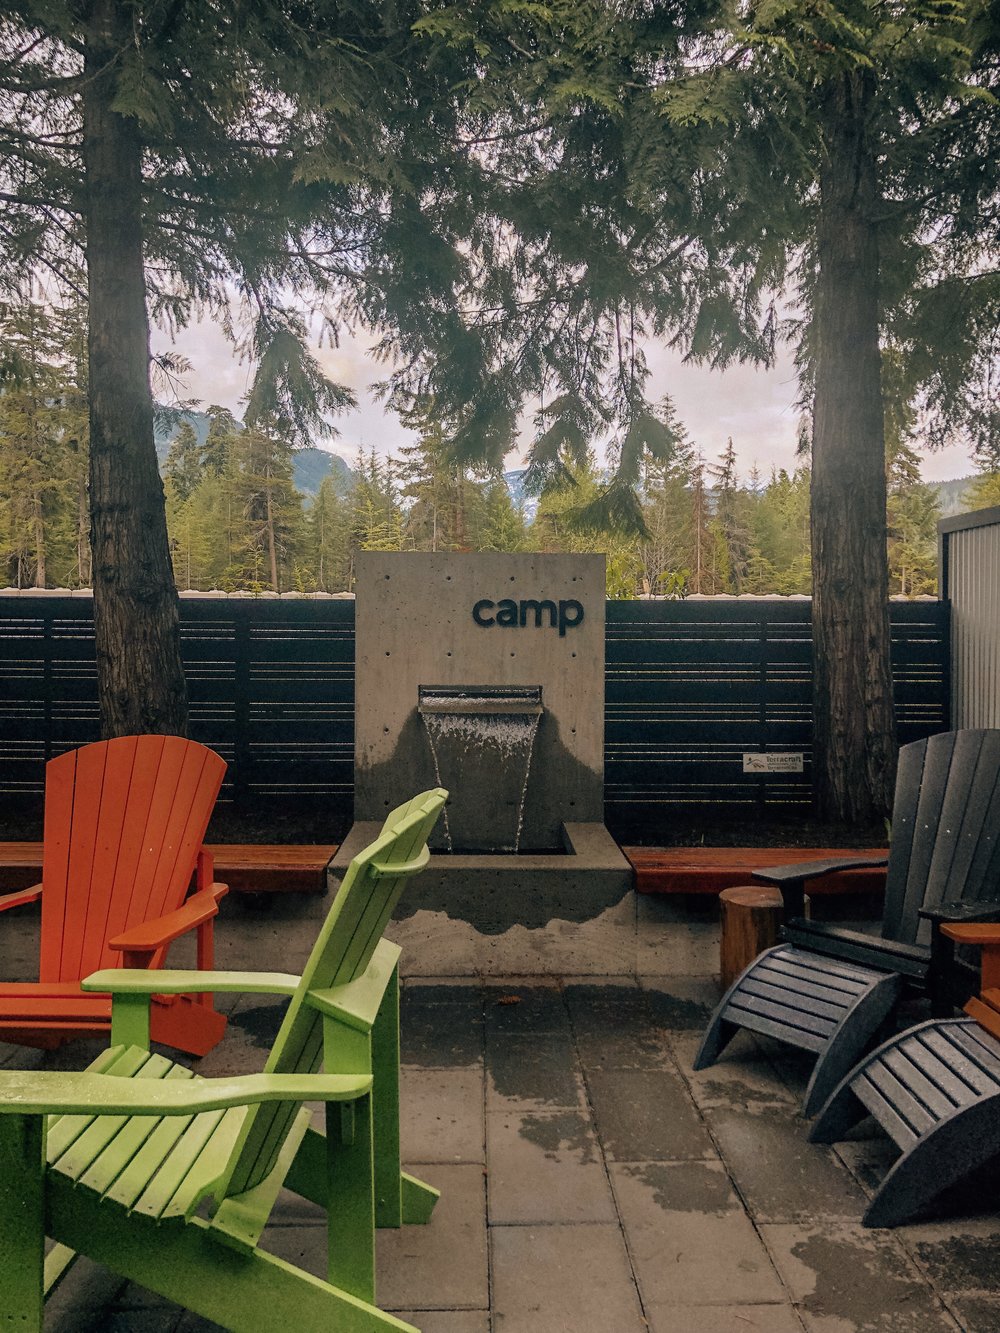 Camp Lifestyle hipster coffee shop cafe in Whistler BC Canada